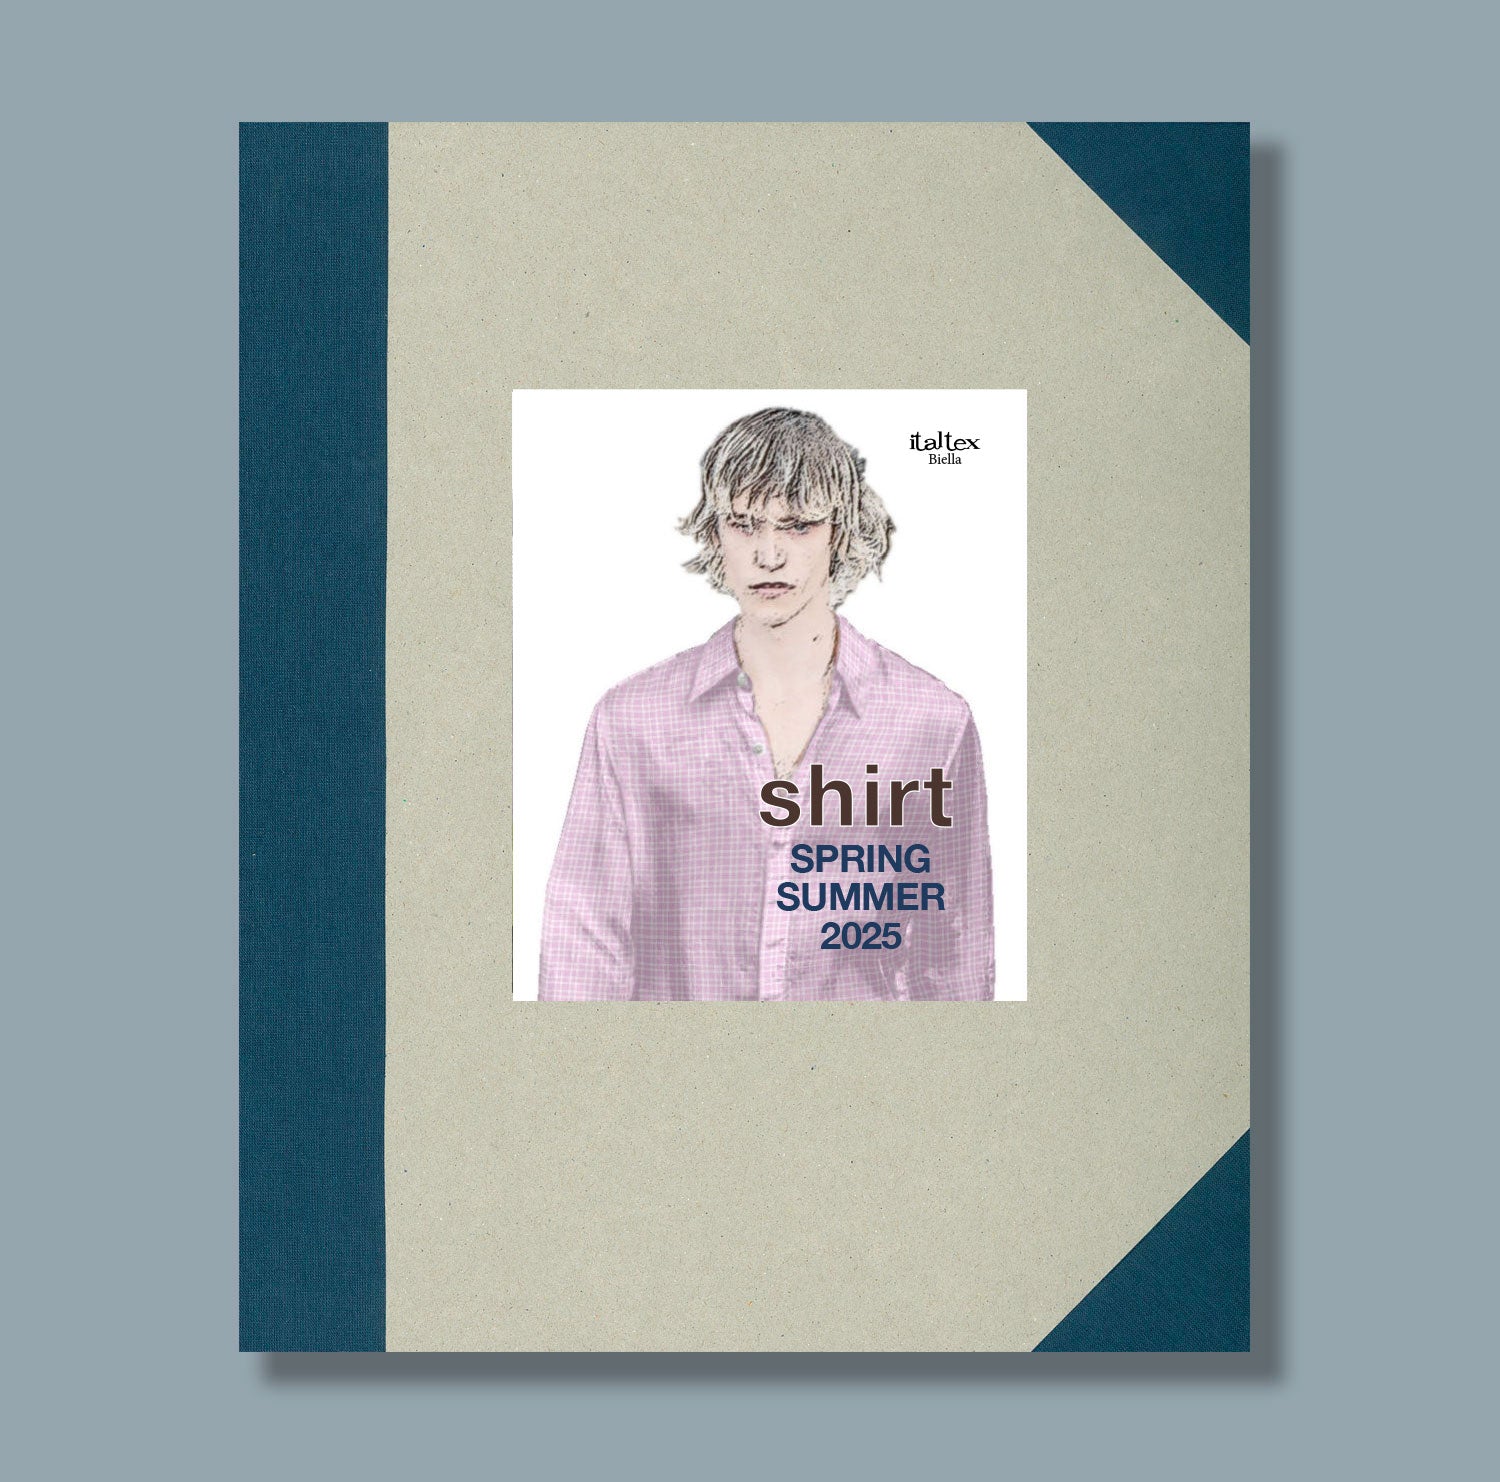 The cover of the Italtex fabric and color trend book Shirt Spring/Summer 2025 is a hardback cover in natural cardboard with dark blue canvas decorations along the spine and covering the corners. In the middle there is a picture showing a man wearing a shirt made with one of the fabrics contained in the book. It is a subdued small repeat check